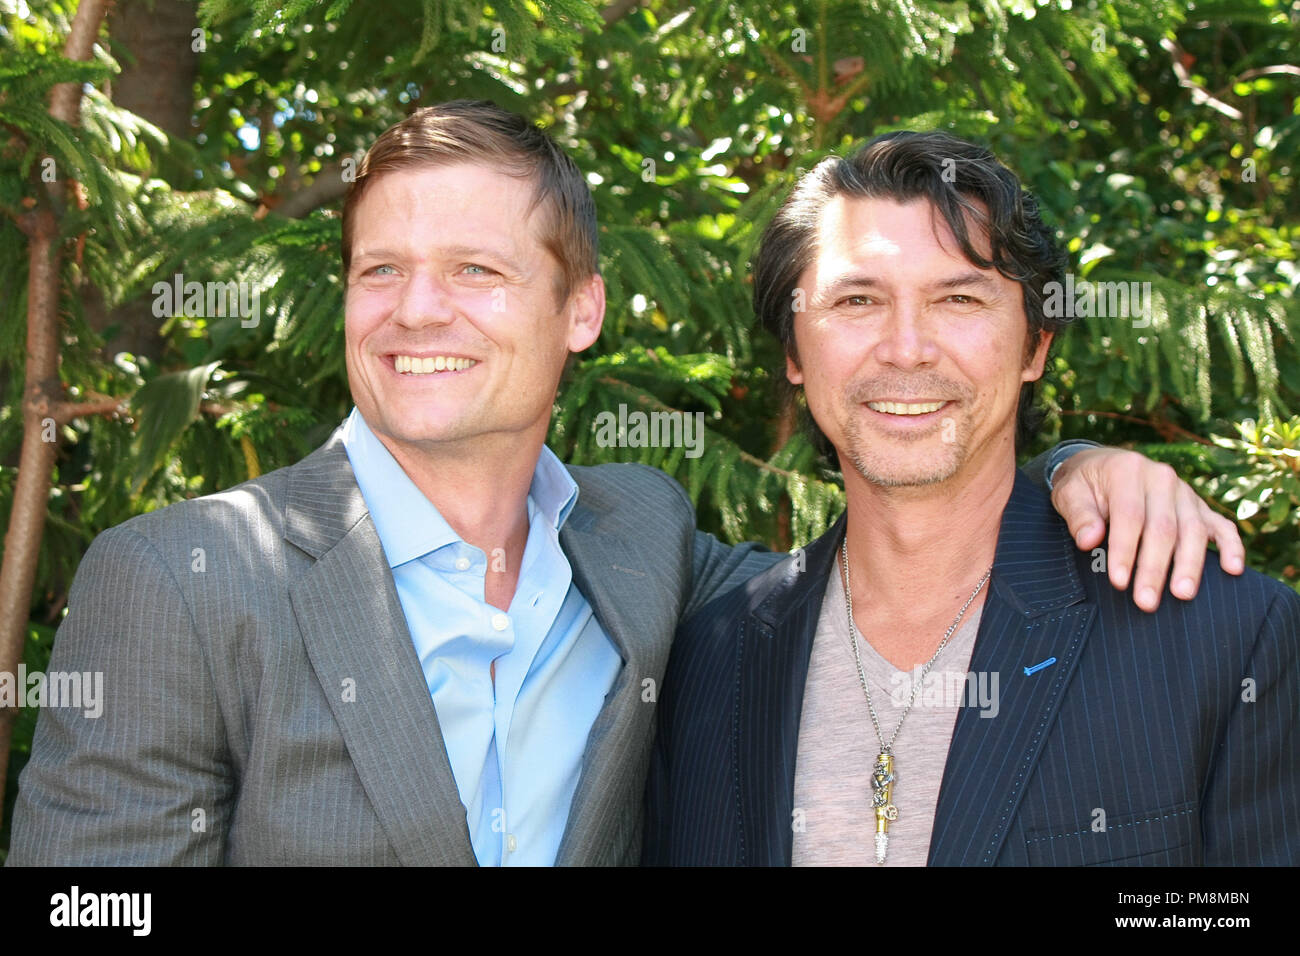 Bailey Chase and Lou Diamond Phillips 'Longmire' TV  Portrait Session, August 27, 2012.  Reproduction by American tabloids is absolutely forbidden. File Reference # 31636 019JRC  For Editorial Use Only -  All Rights Reserved Stock Photo